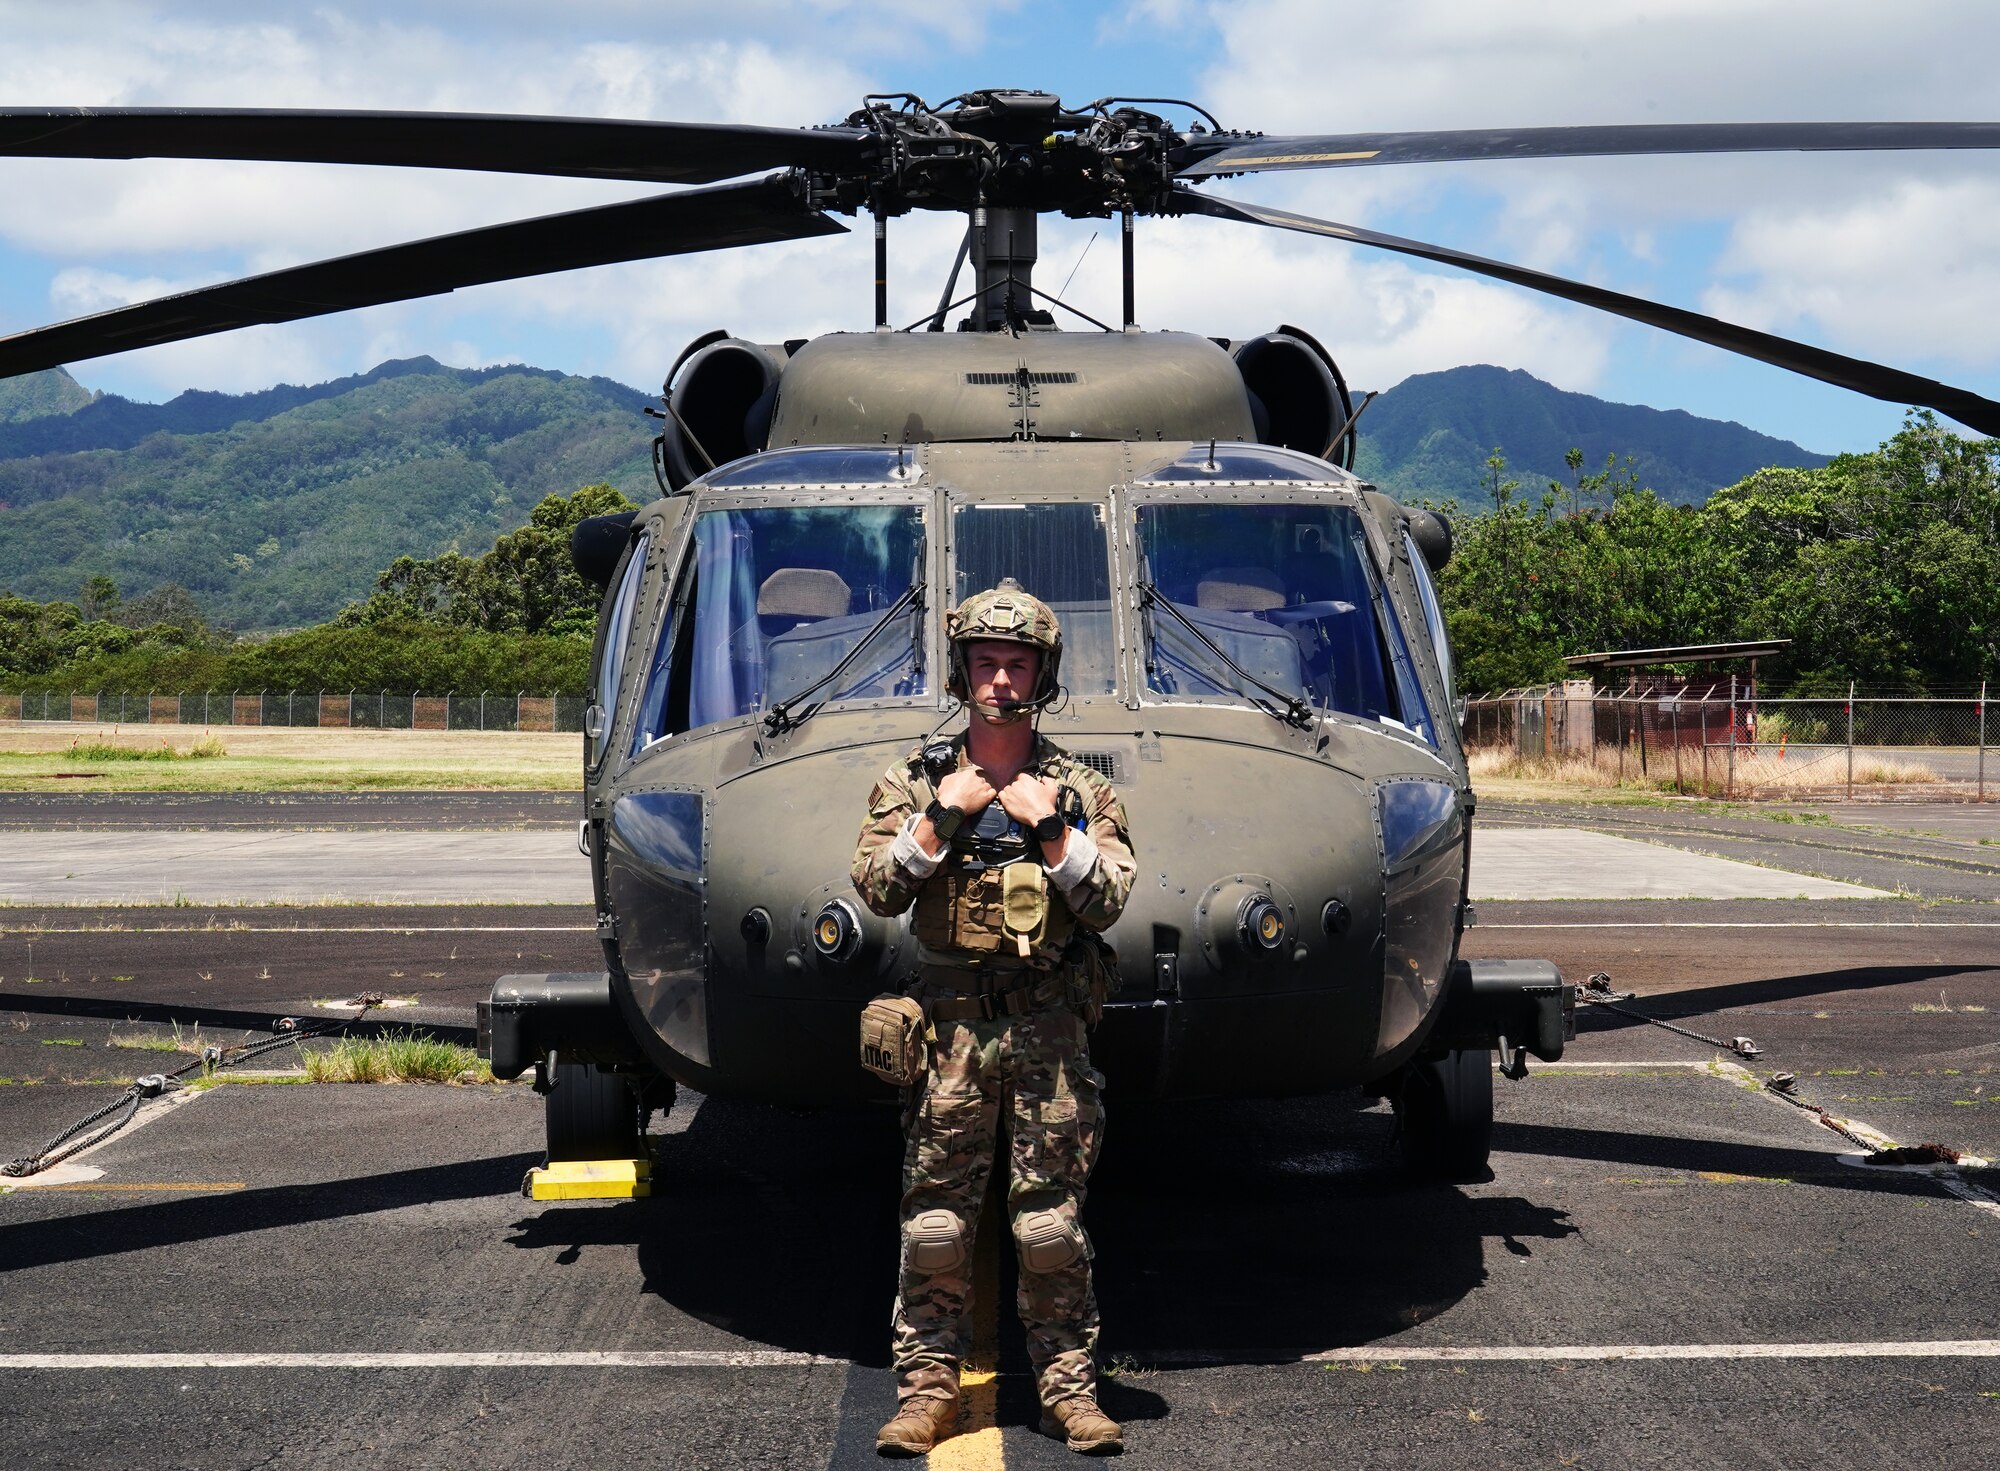 U.S. Air Force Staff Sgt. Derek Skelton, 25th Air Support Operations Squadron Tactical Air Control Party Airman, stands in front of a Sikorsky UH-60 Black Hawk on Wheeler Army Airfield, Hawaii, June 5, 2020. TACP Airmen train while down range and on simulations to ensure they are always battle-ready. (U.S. Air Force photo by Airman 1st Class Erin Baxter)